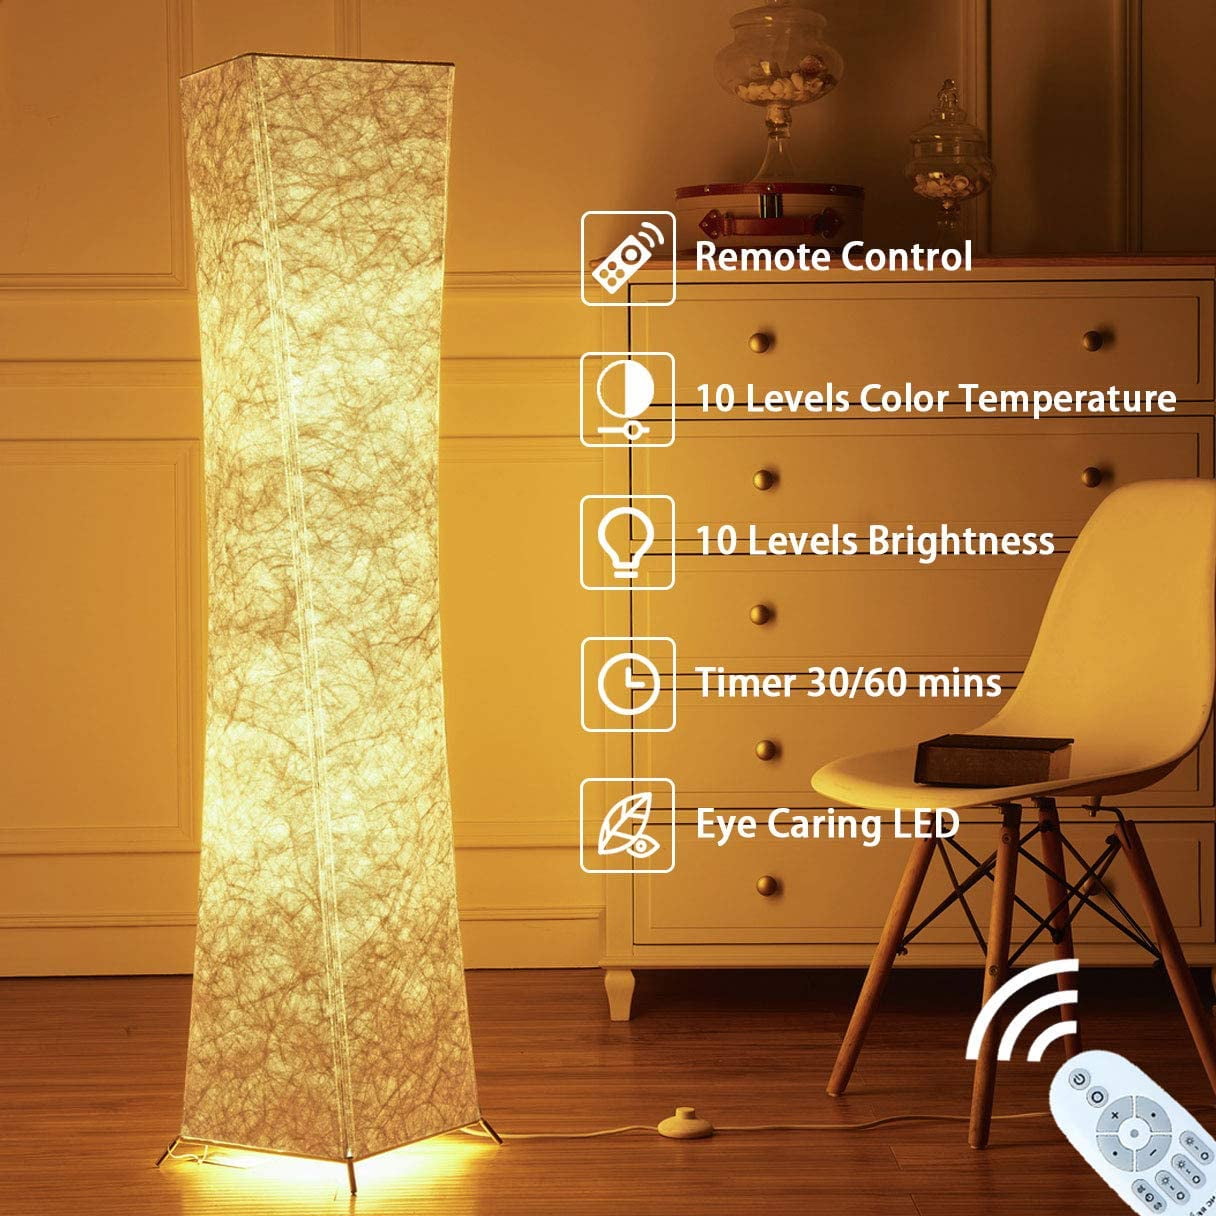 Floor Lamp, CHIPHY Standing lamp with Remote Control, Dimmable and Adjustable Color Temperature 12W LED Bulbs(2400 Lumens, 100 Watt Equivalent) White Fabric Cozy for Bedroom and Living Room - Walmart.com